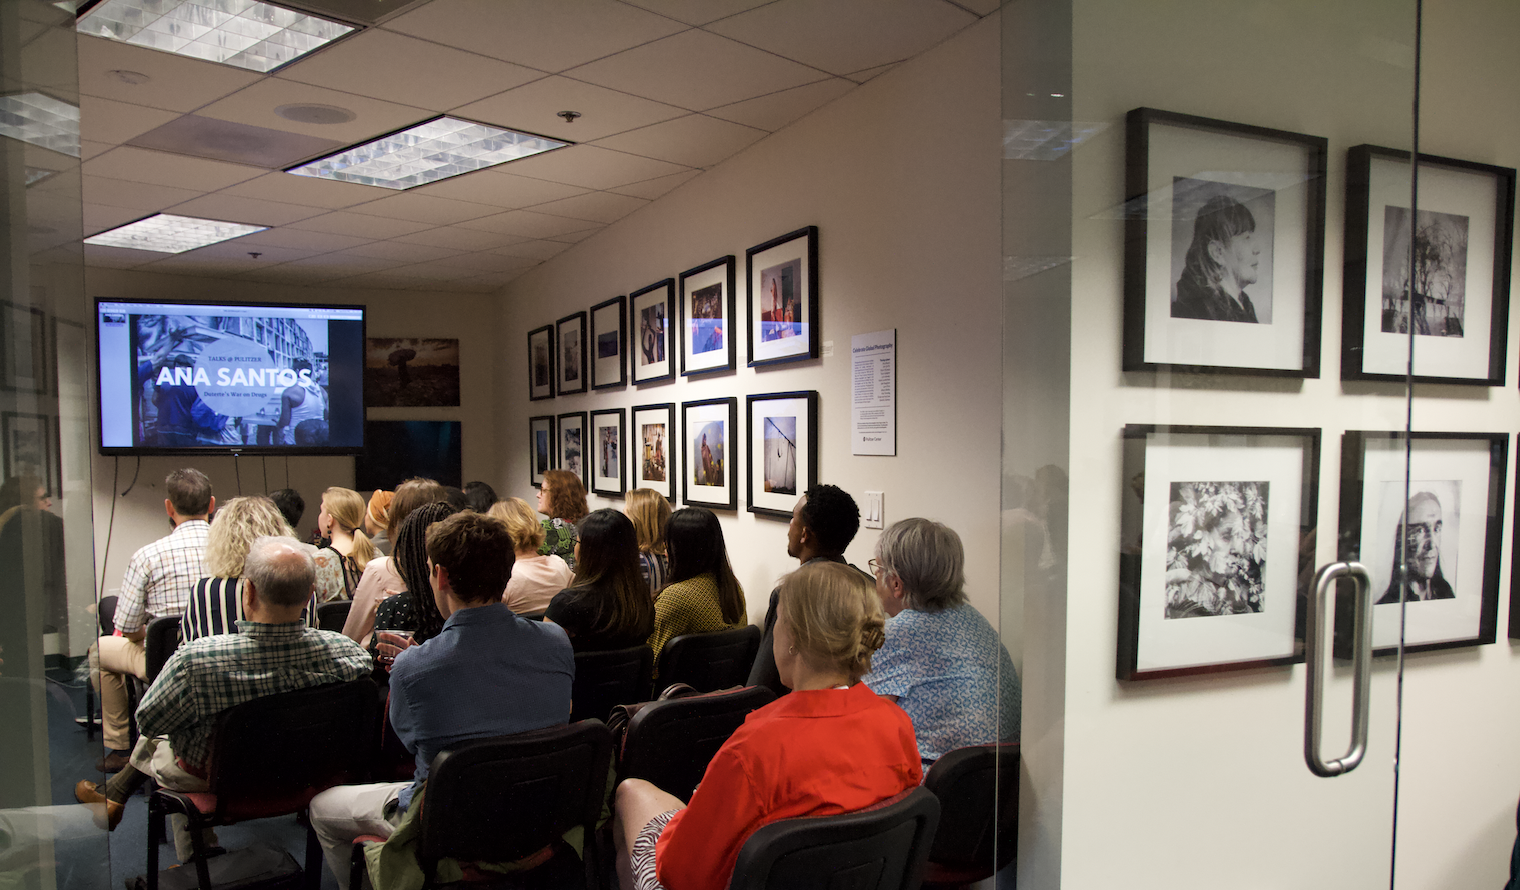 Talks @ Pulitzer audience listens as journalist Ana Santos is introduced. Image by Kate Karstens. United States, 2018.